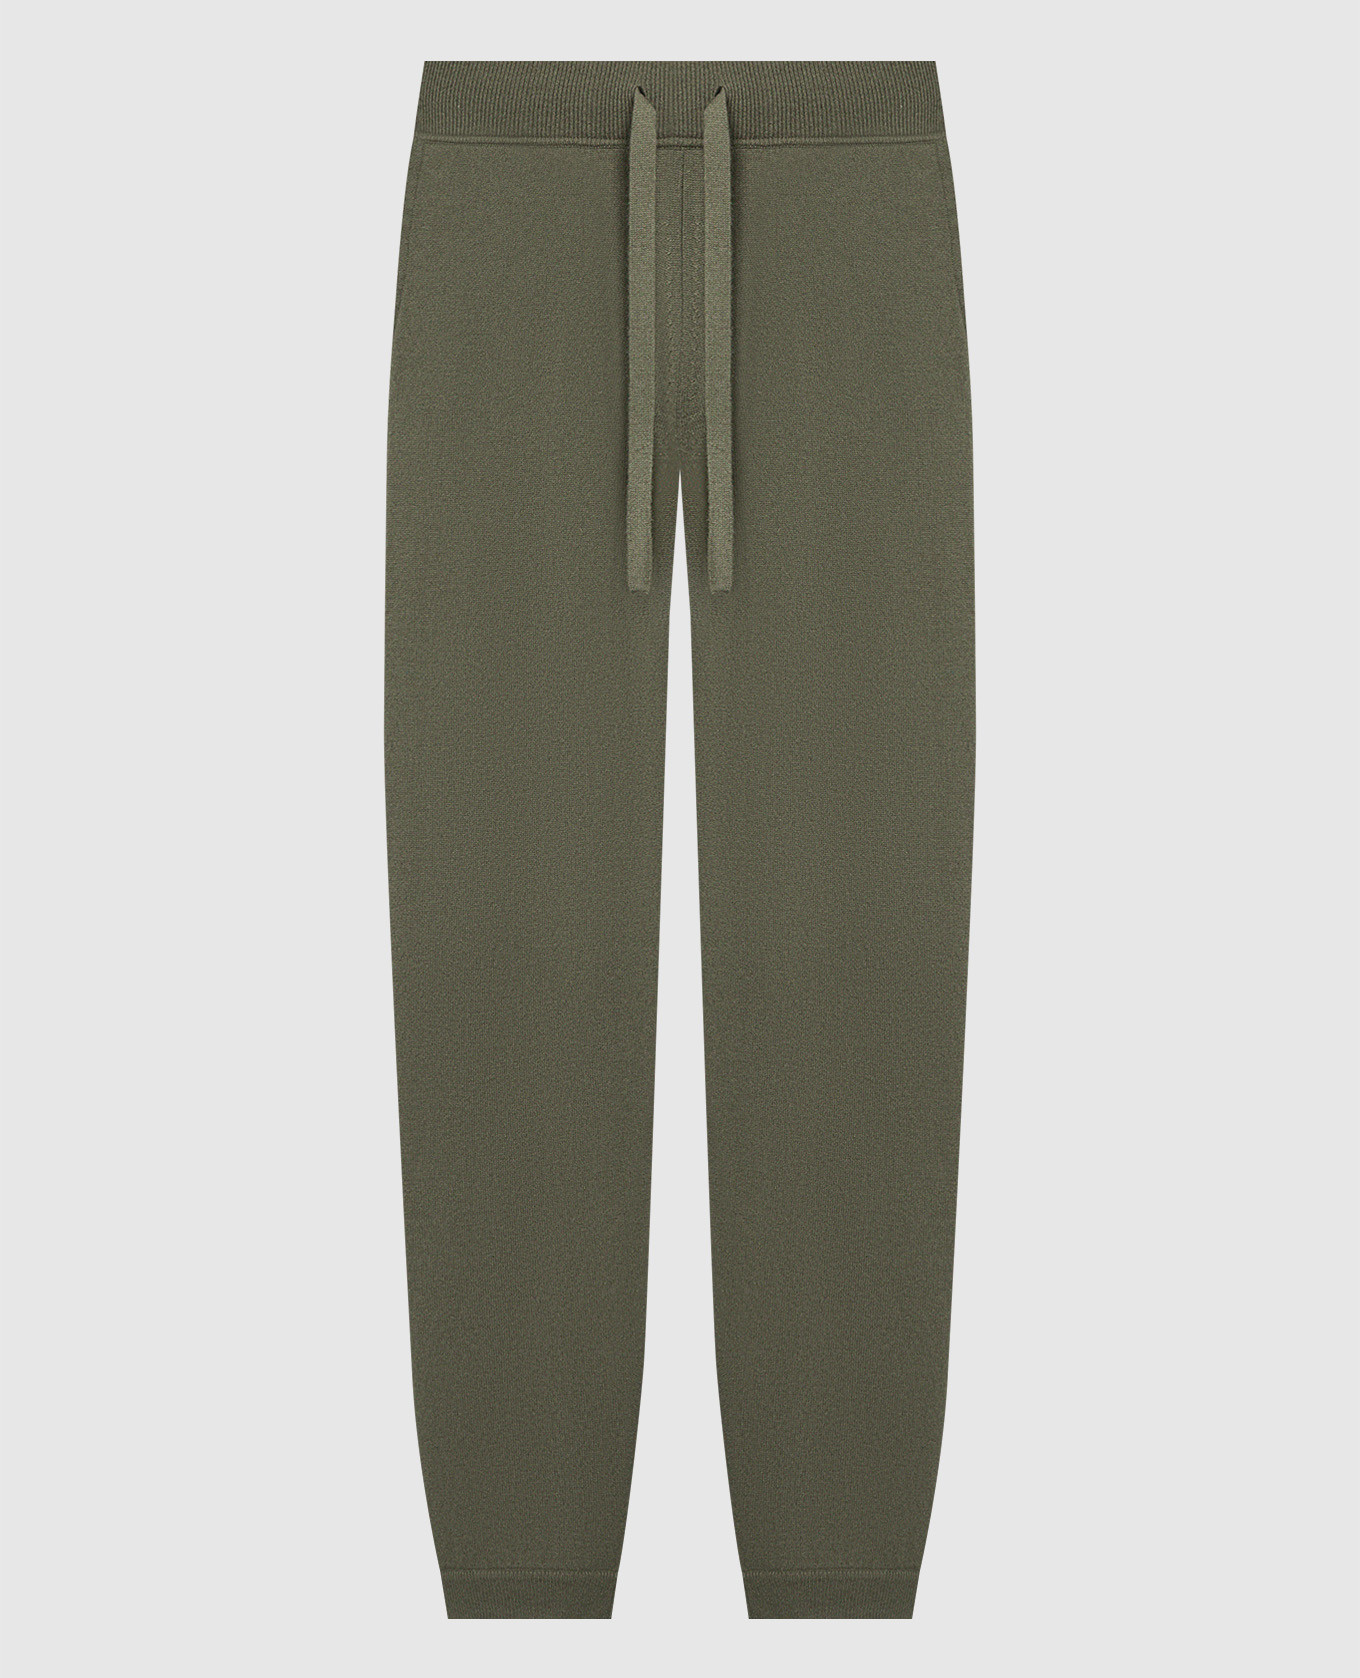 Khaki wool and cashmere joggers